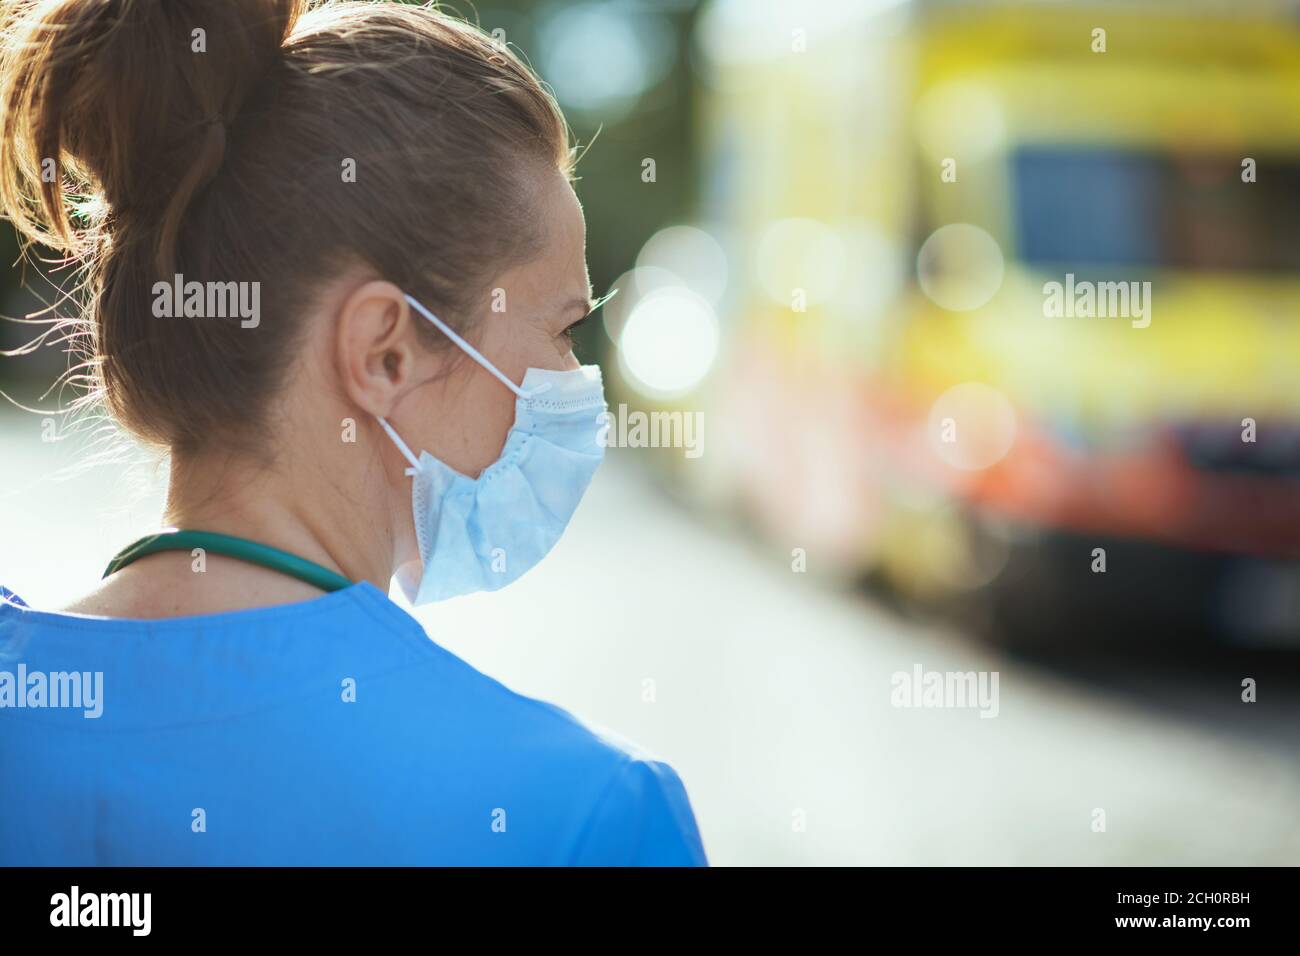 covid-19 pandemic. Seen from behind medical doctor woman in uniform with medical mask outside near ambulance. Stock Photo